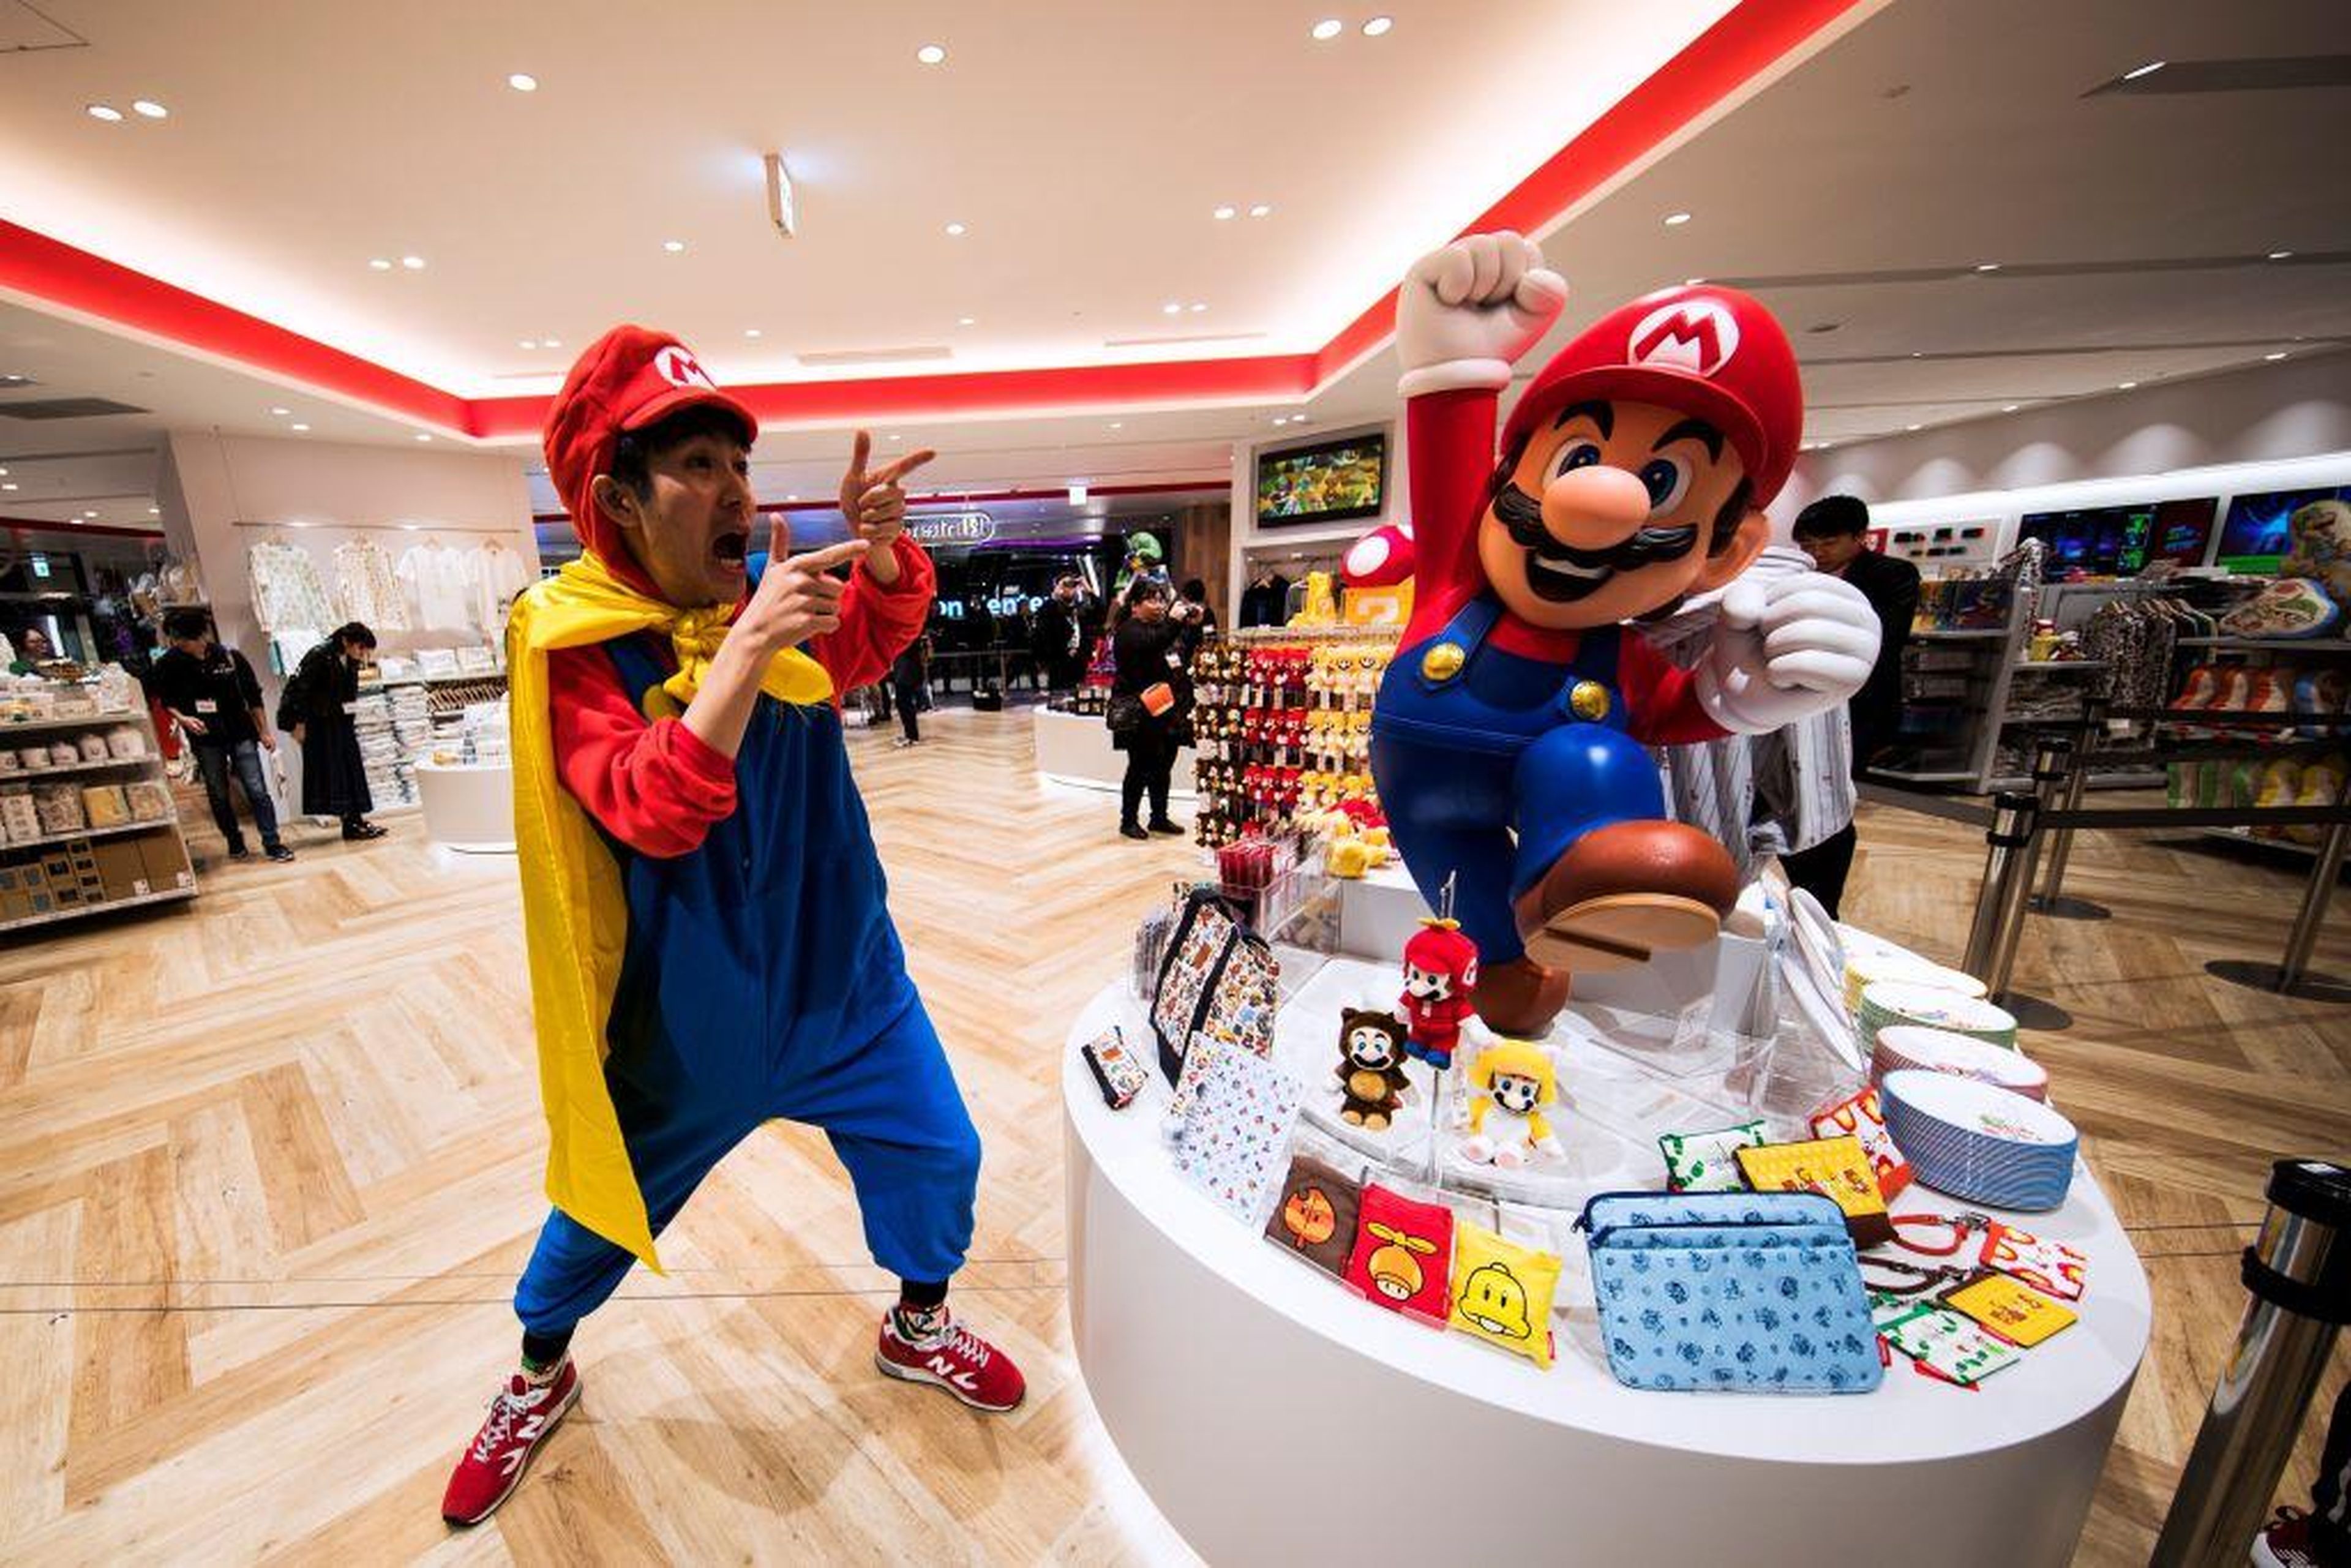 The store is filled with exclusive merchandise and art dedicated to iconic Nintendo characters, like Super Mario ...